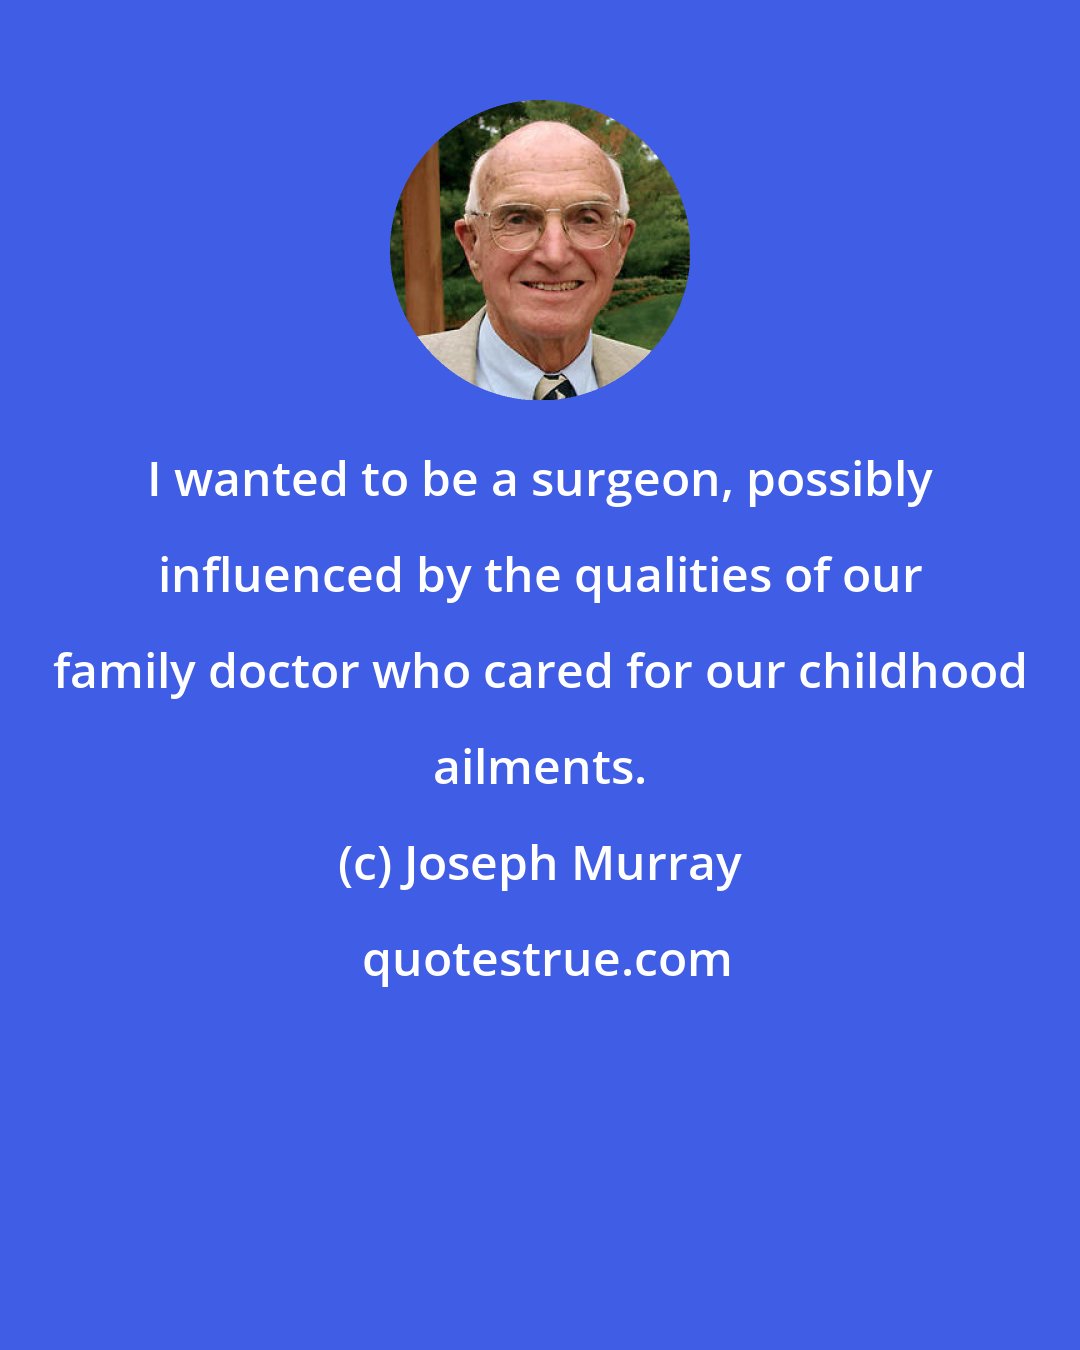 Joseph Murray: I wanted to be a surgeon, possibly influenced by the qualities of our family doctor who cared for our childhood ailments.